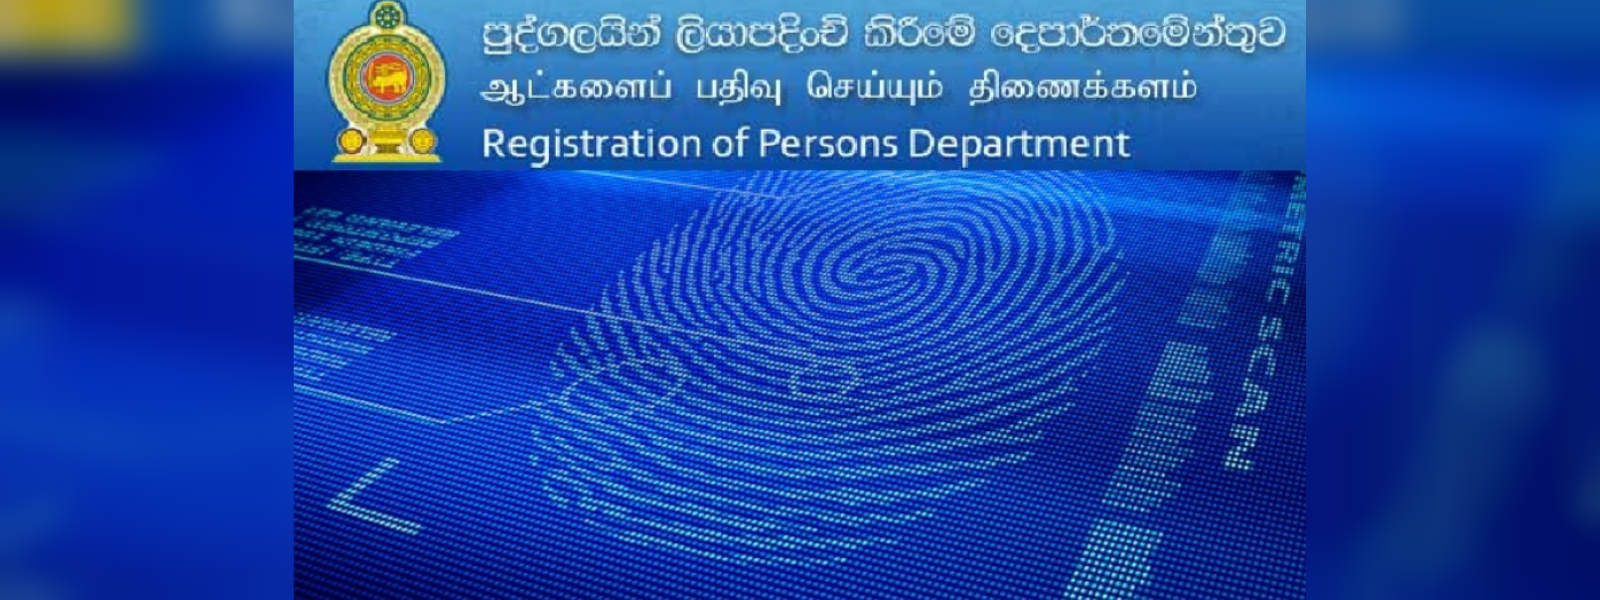 Smart ID cards to be issued from today